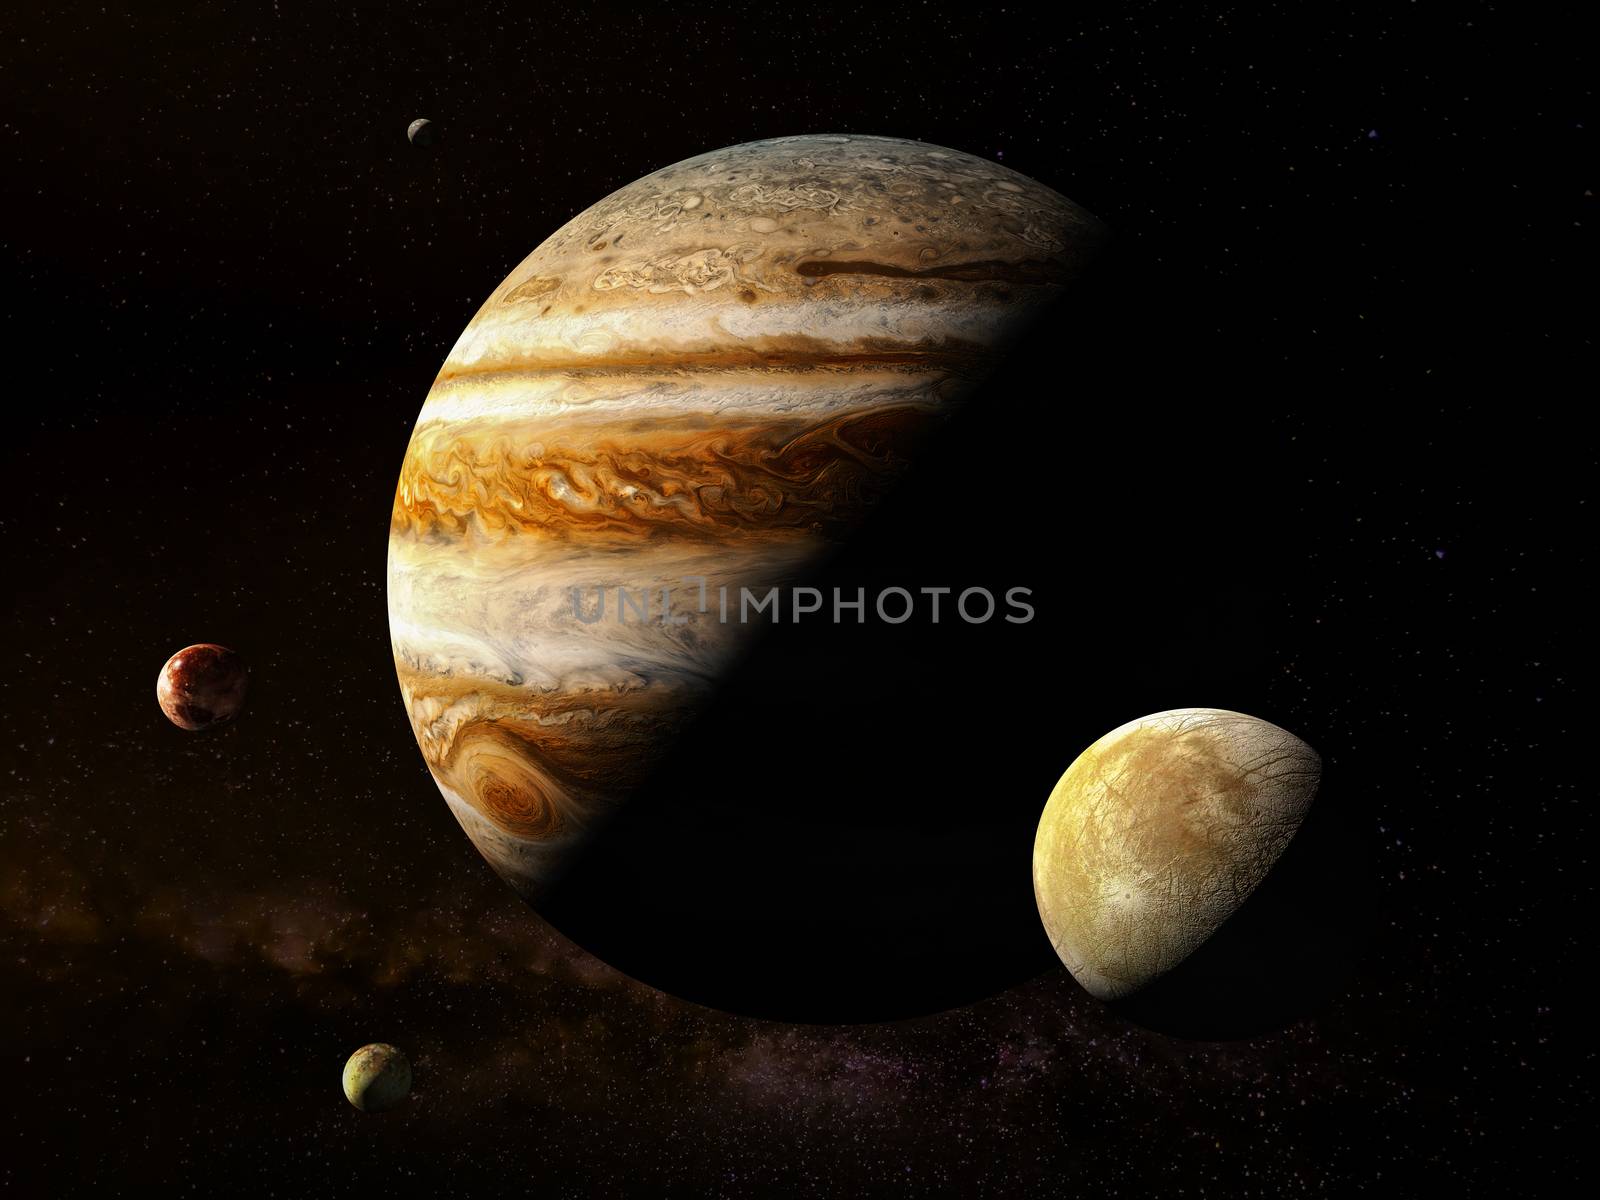 Jupiter with moons - High resolution 3D Rendering images presents planets of the solar system. by tussik